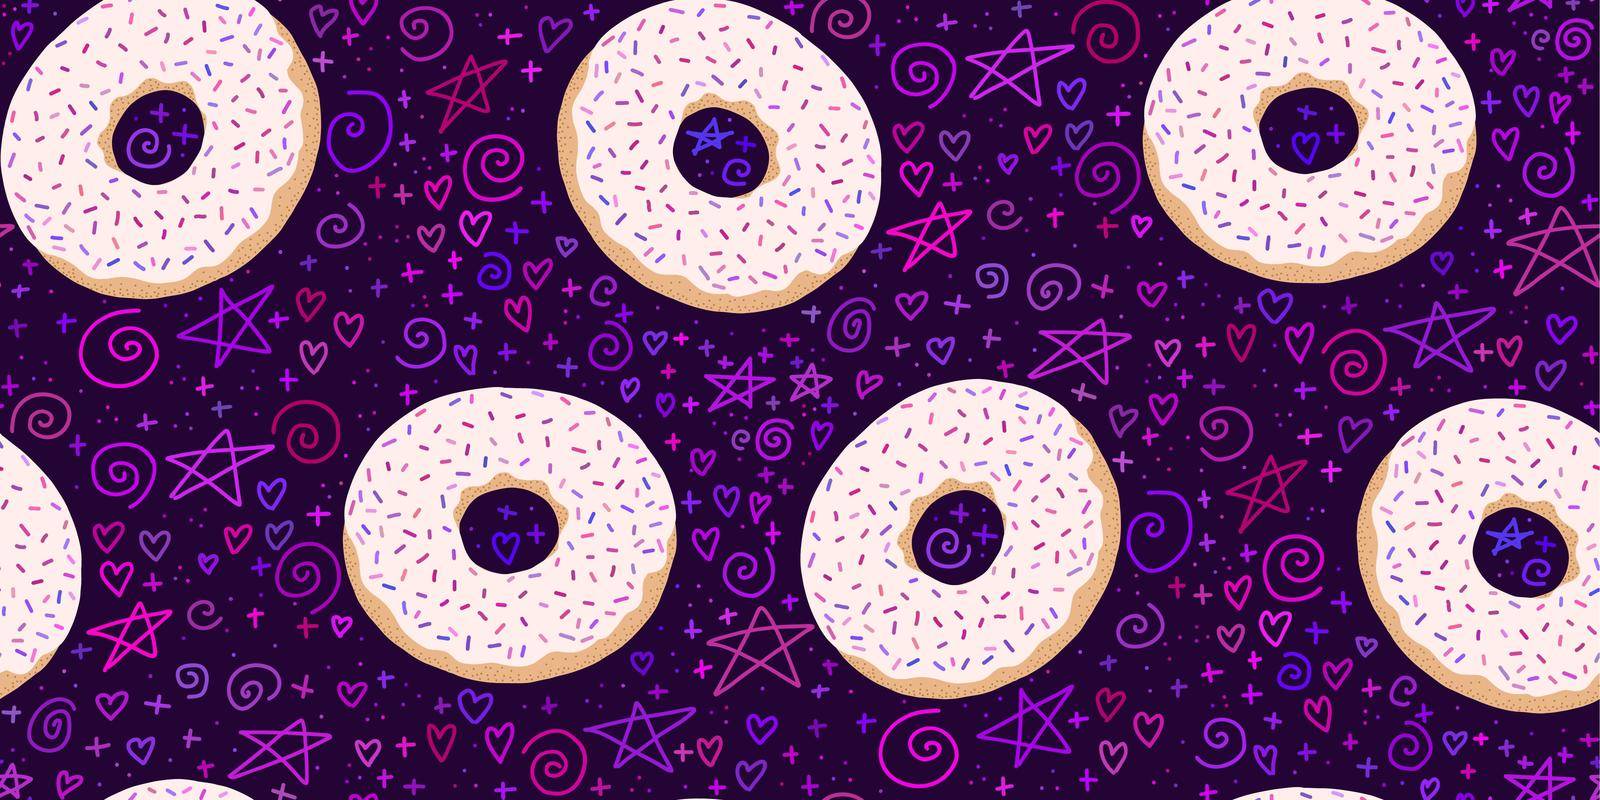 Donuts seamless pattern. Pastry with glaze and sprinkles, floating in space, with abstract doodles on a dark background. Flat hand-drawn illustration.